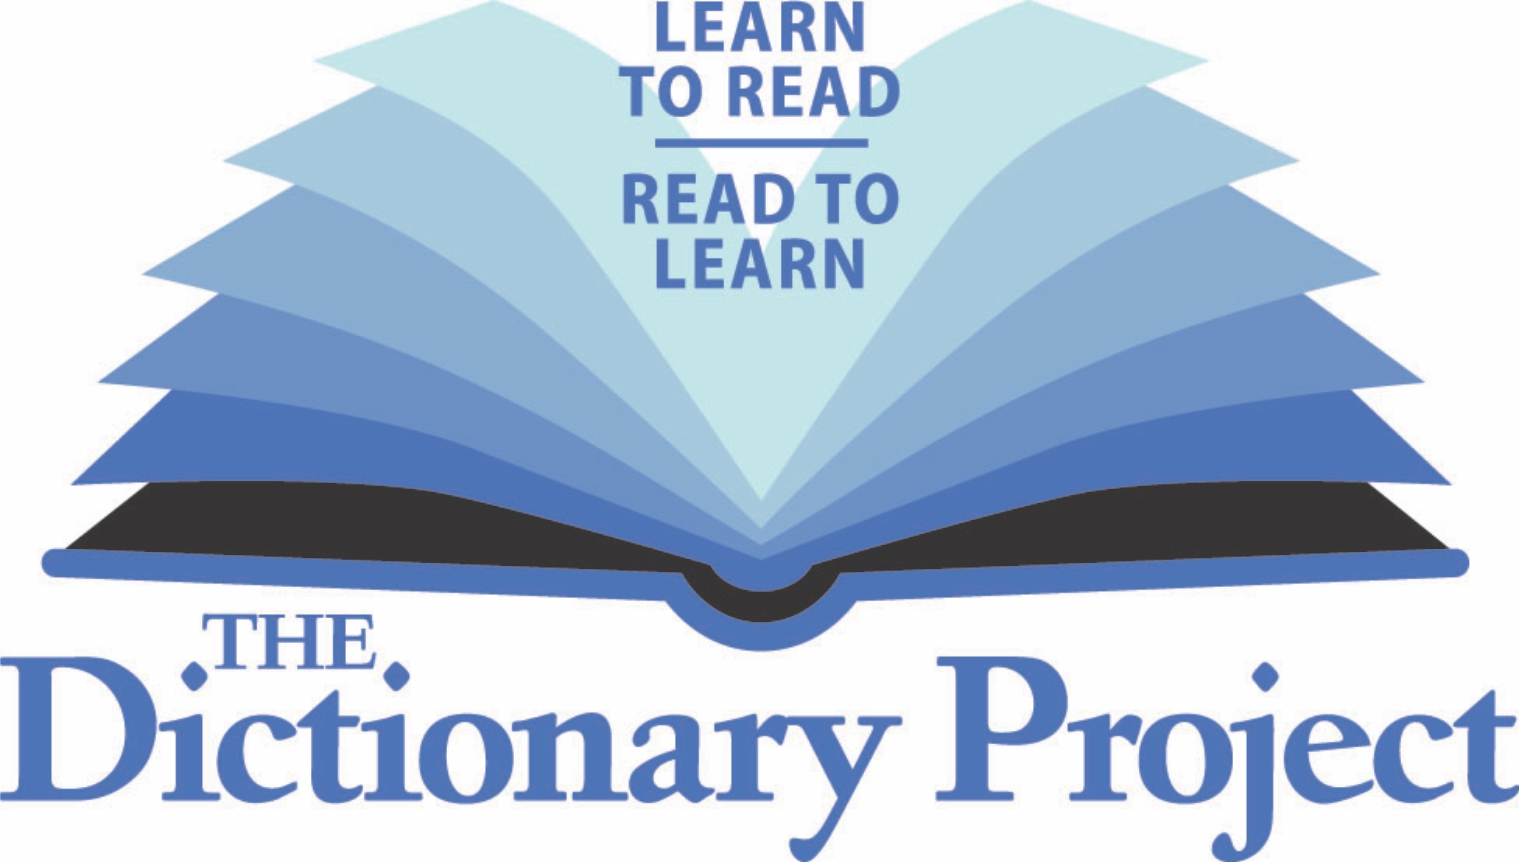 Dictionary Project Logo 1520 x 862 .png